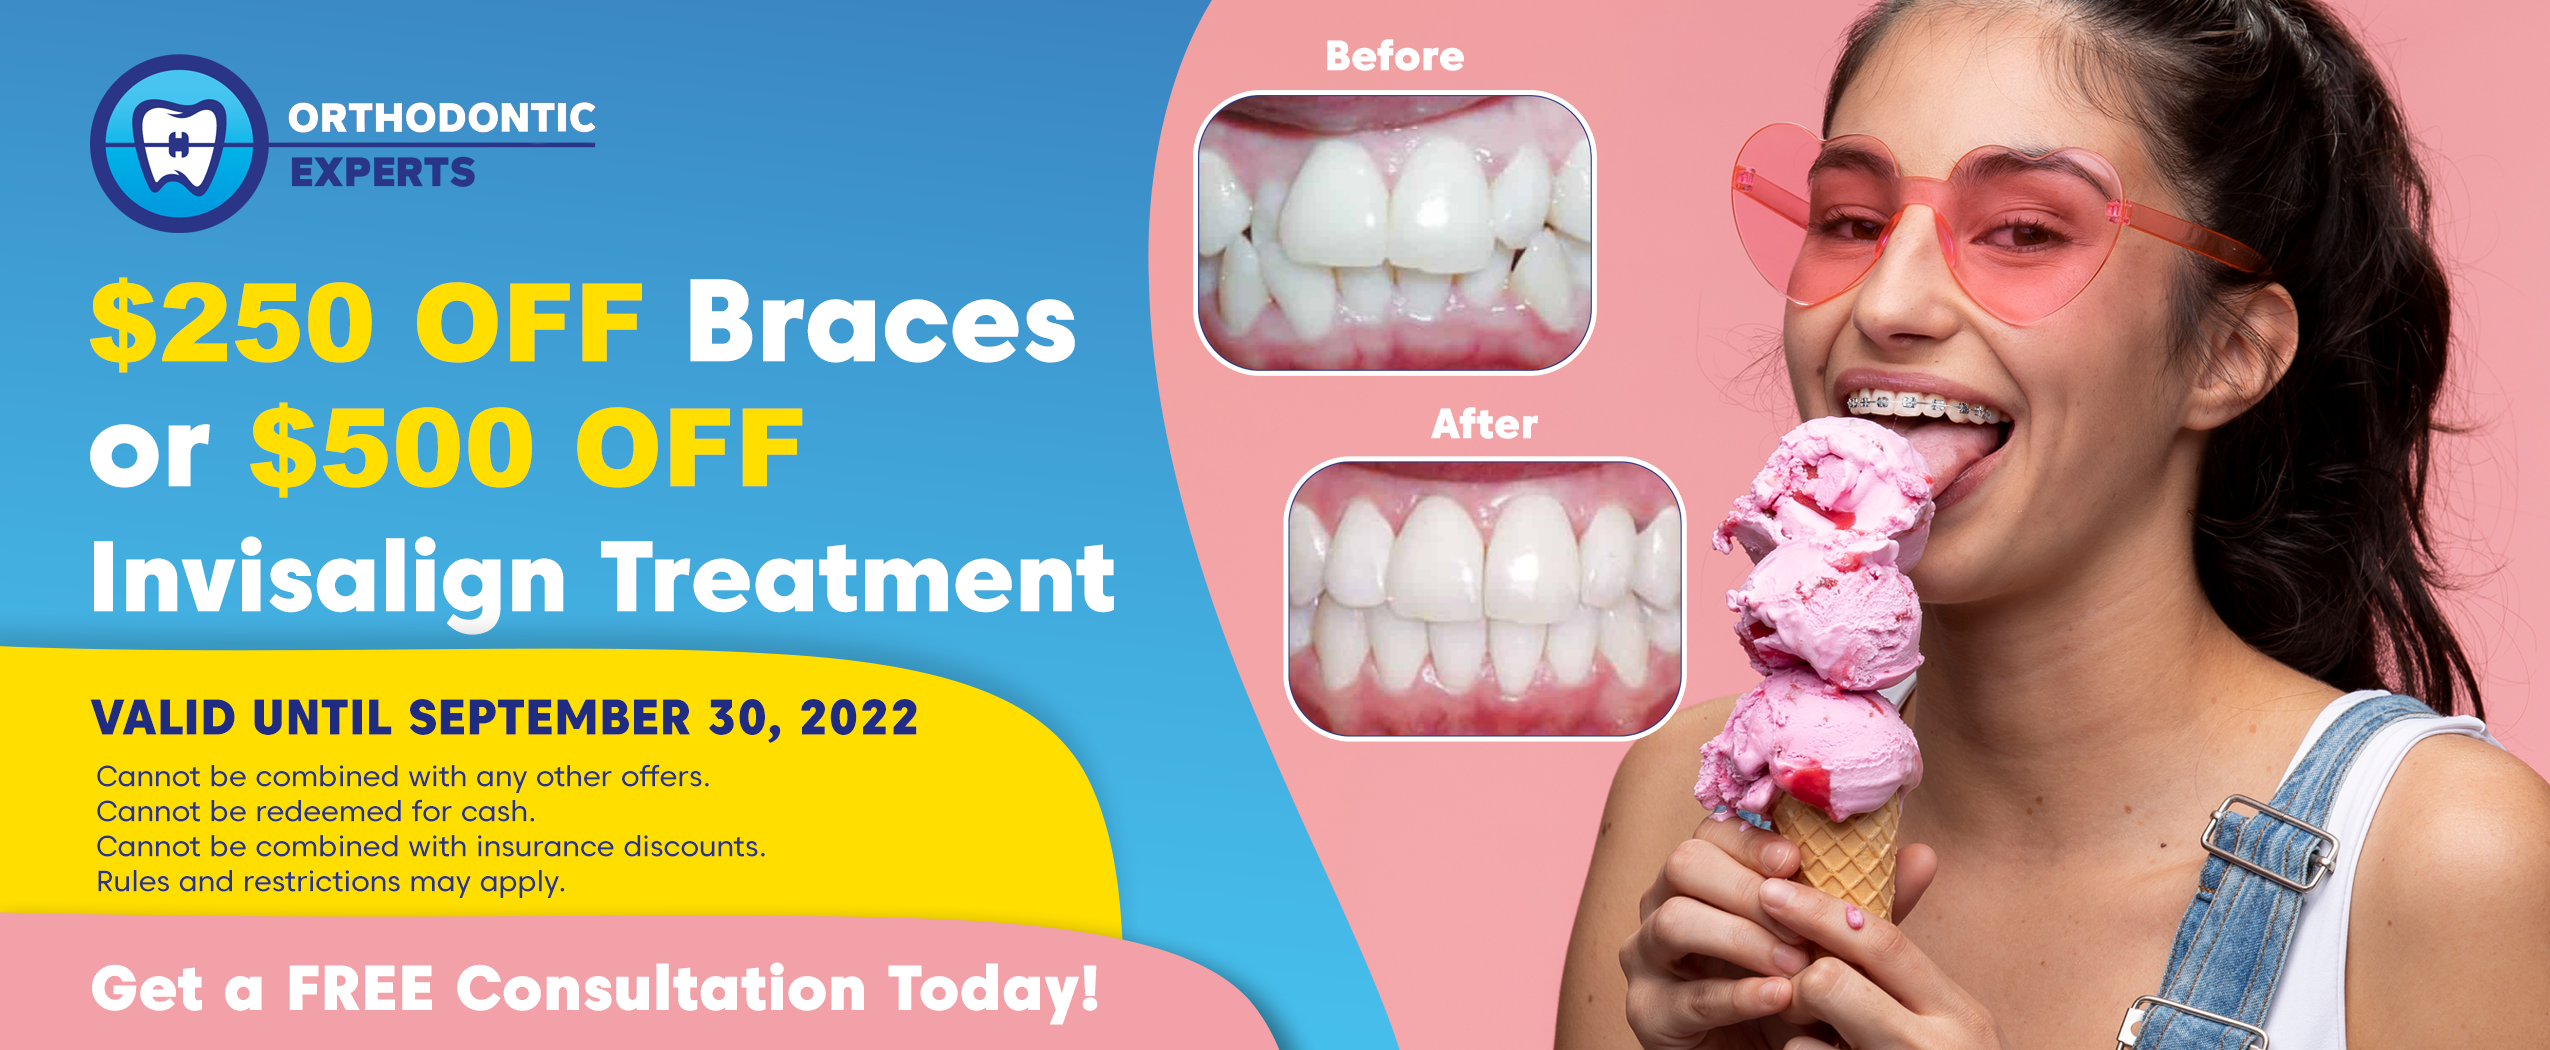 Discount coupon for affordable orthodontic treatment